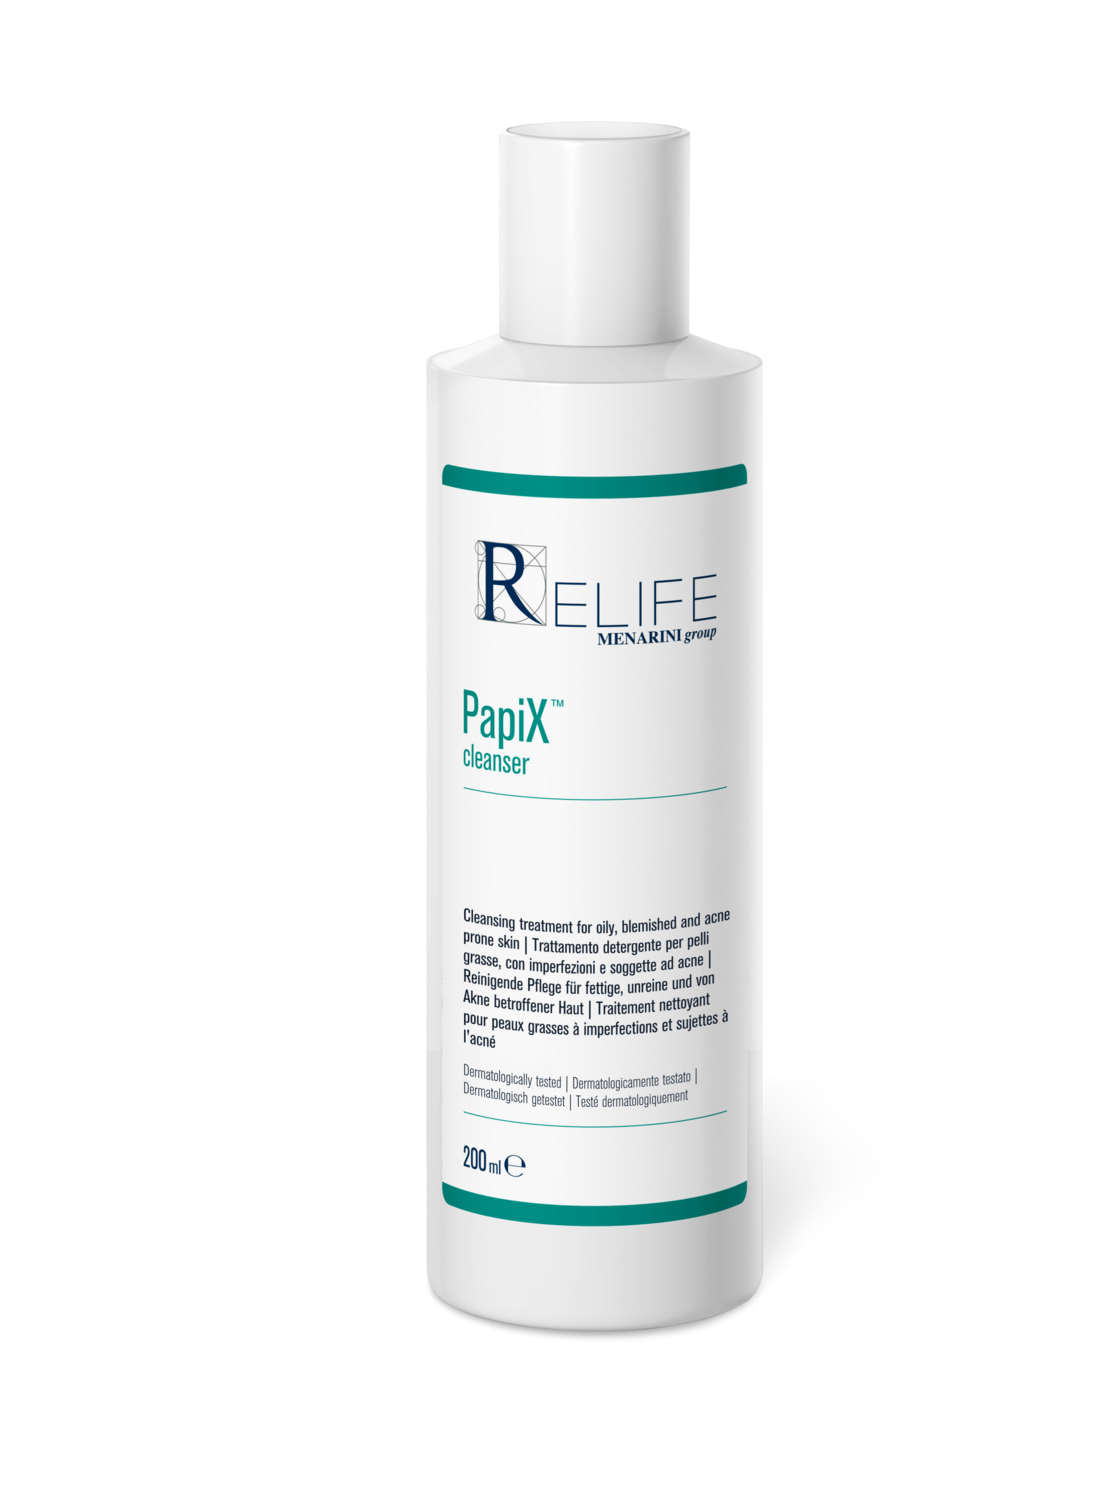 Relife PapiX Cleanser for Acne Prone Skin 200ml